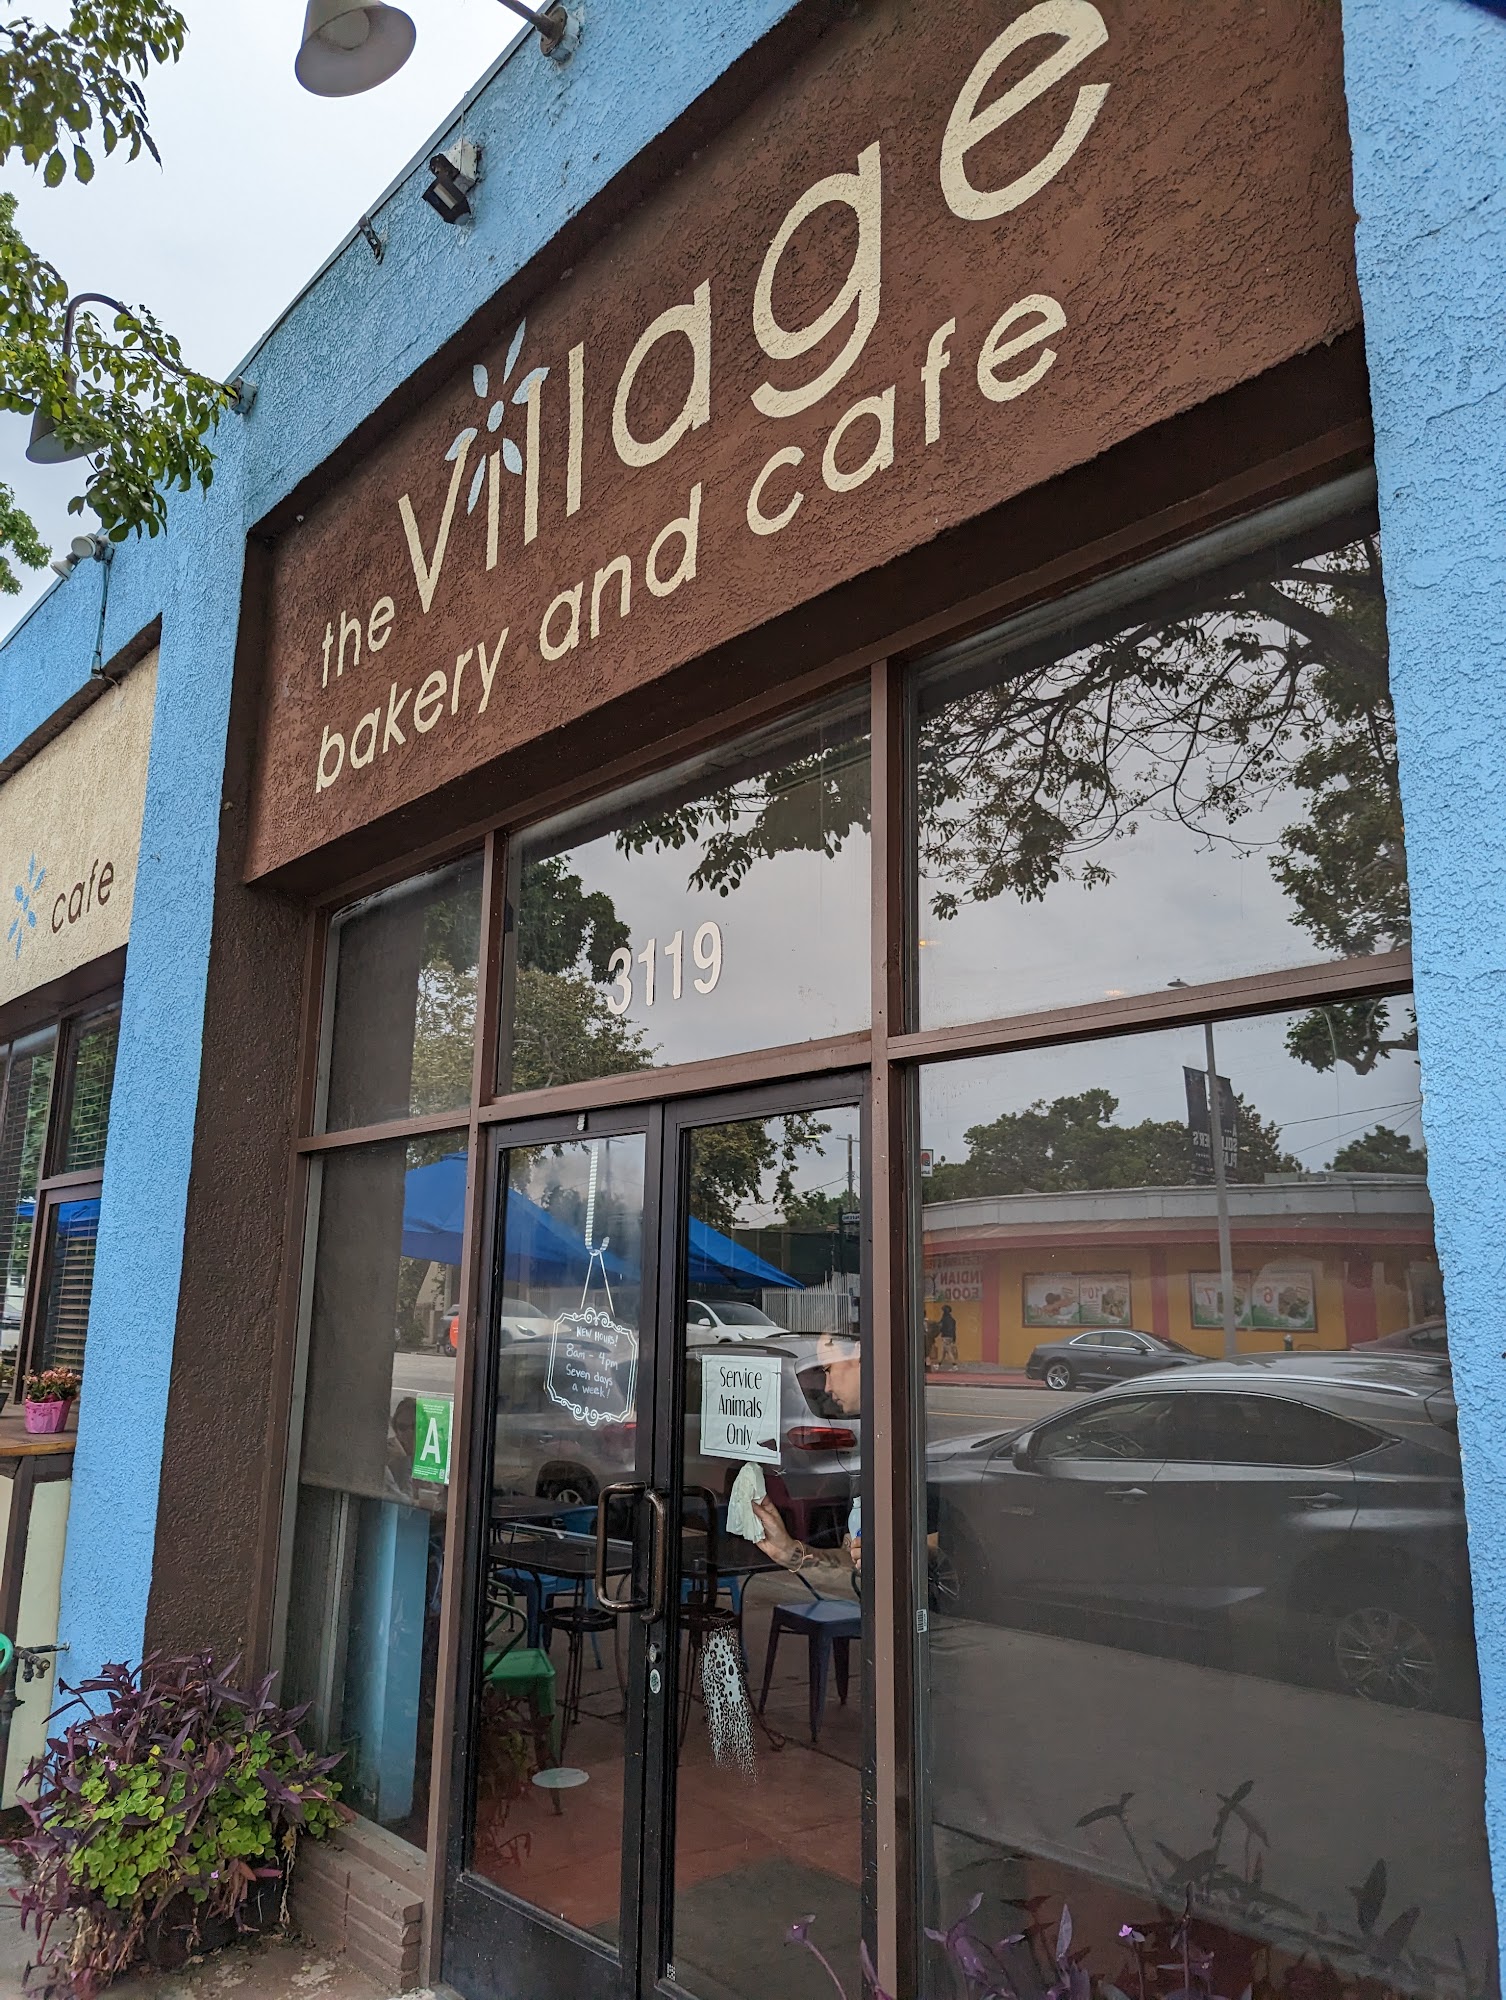 The Village Bakery and Cafe